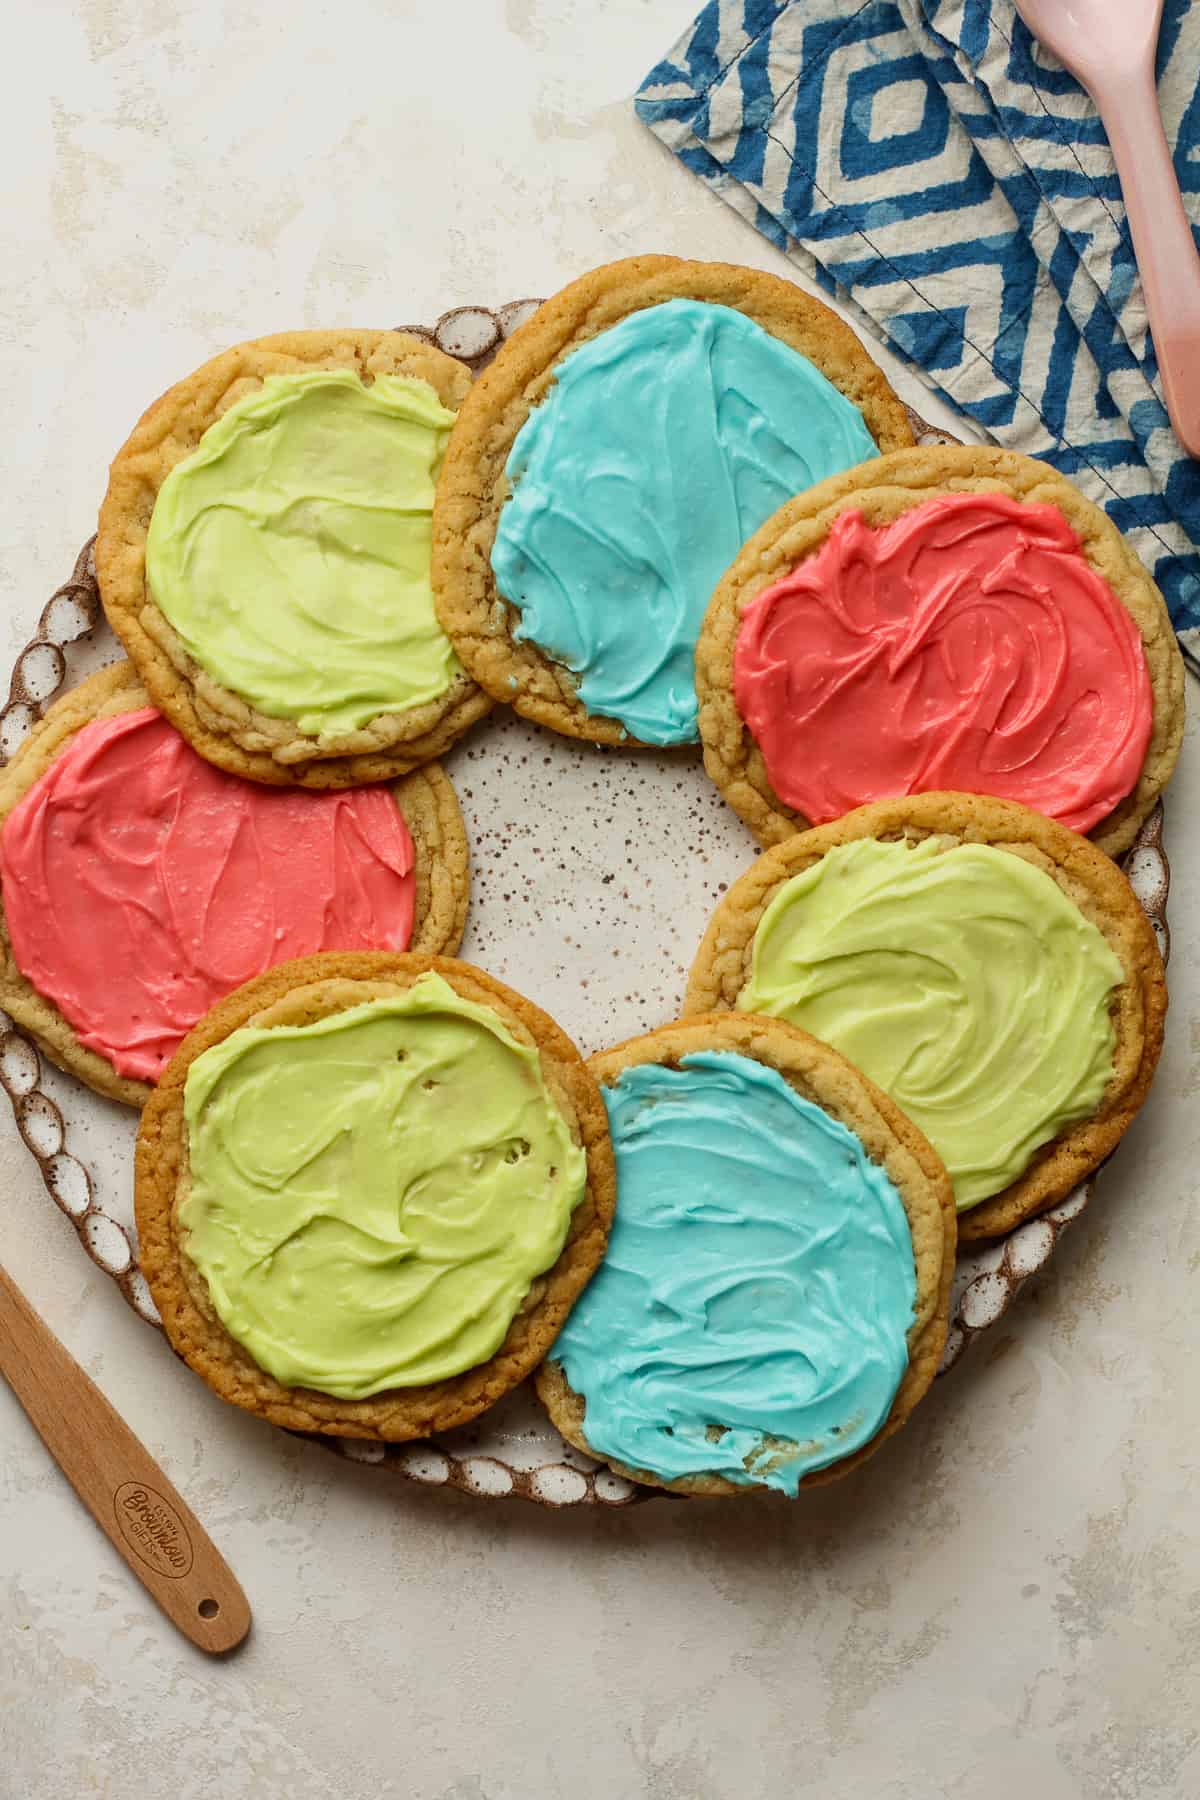 A plate of frosted sugar cookies with green, blue, and red frosting.